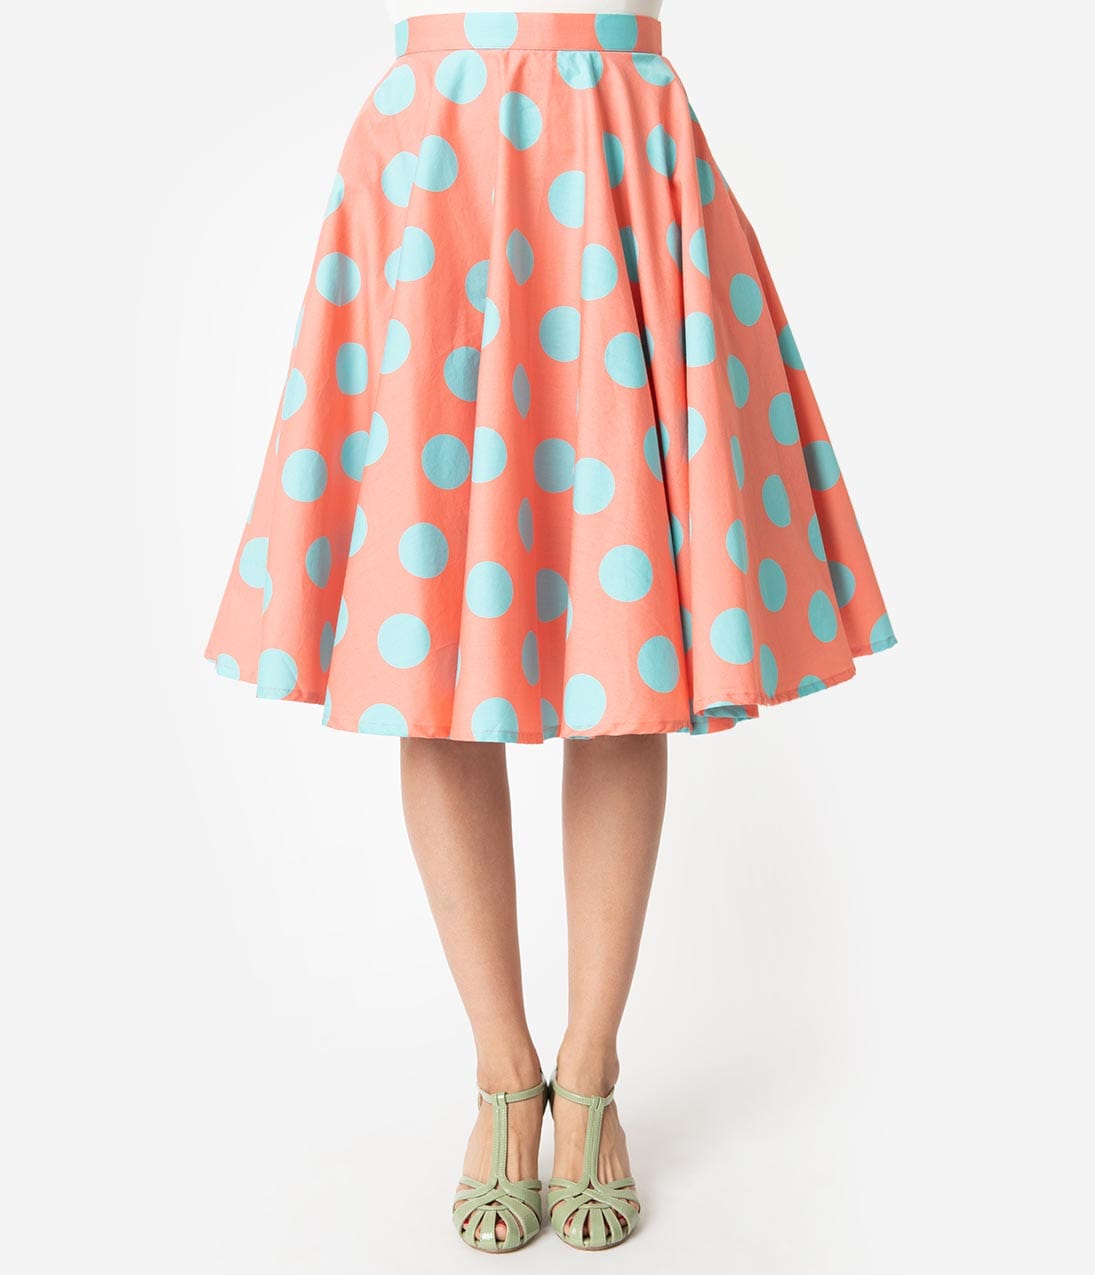 Coral and turquoise dot skirt